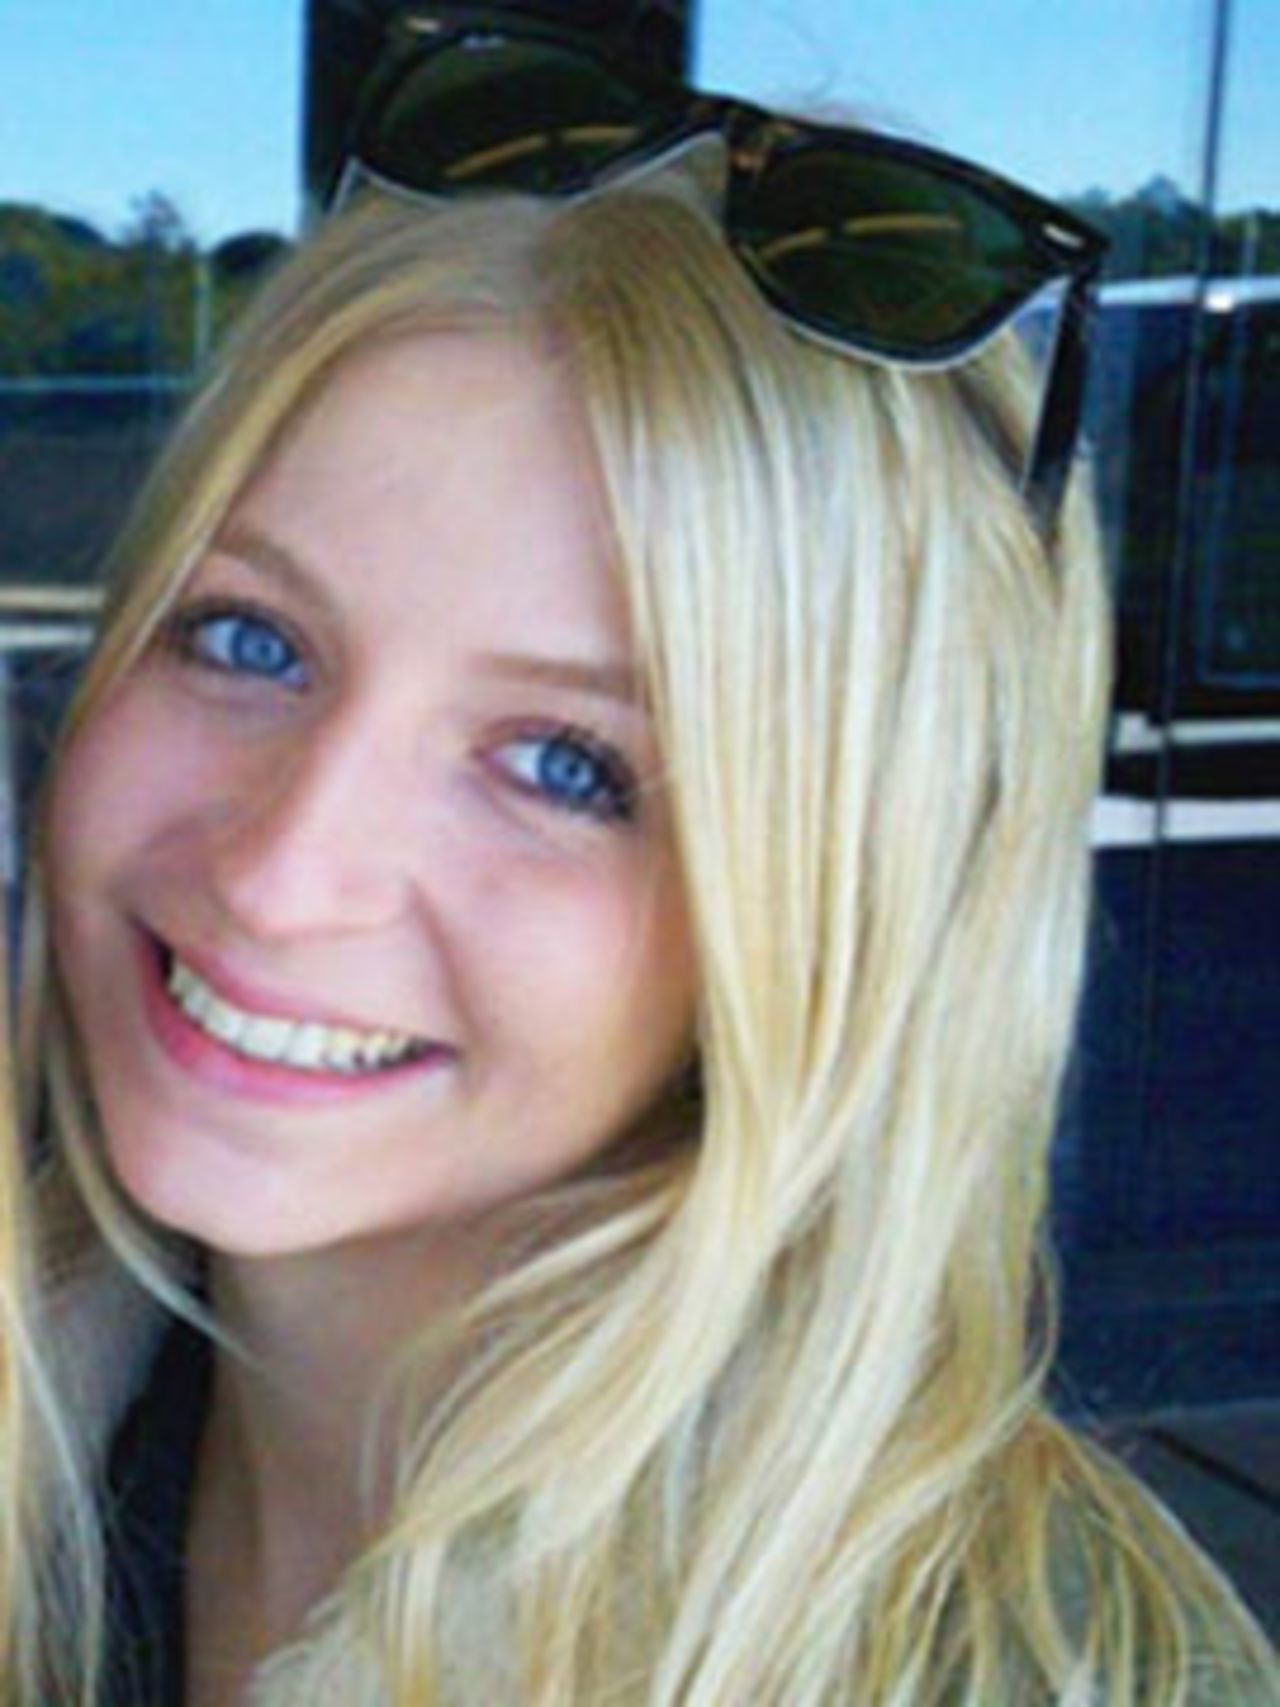 Indiana University student Lauren Spierer, 20, went missing in June 2011. She was last seen leaving a sports bar after a night out with friends.